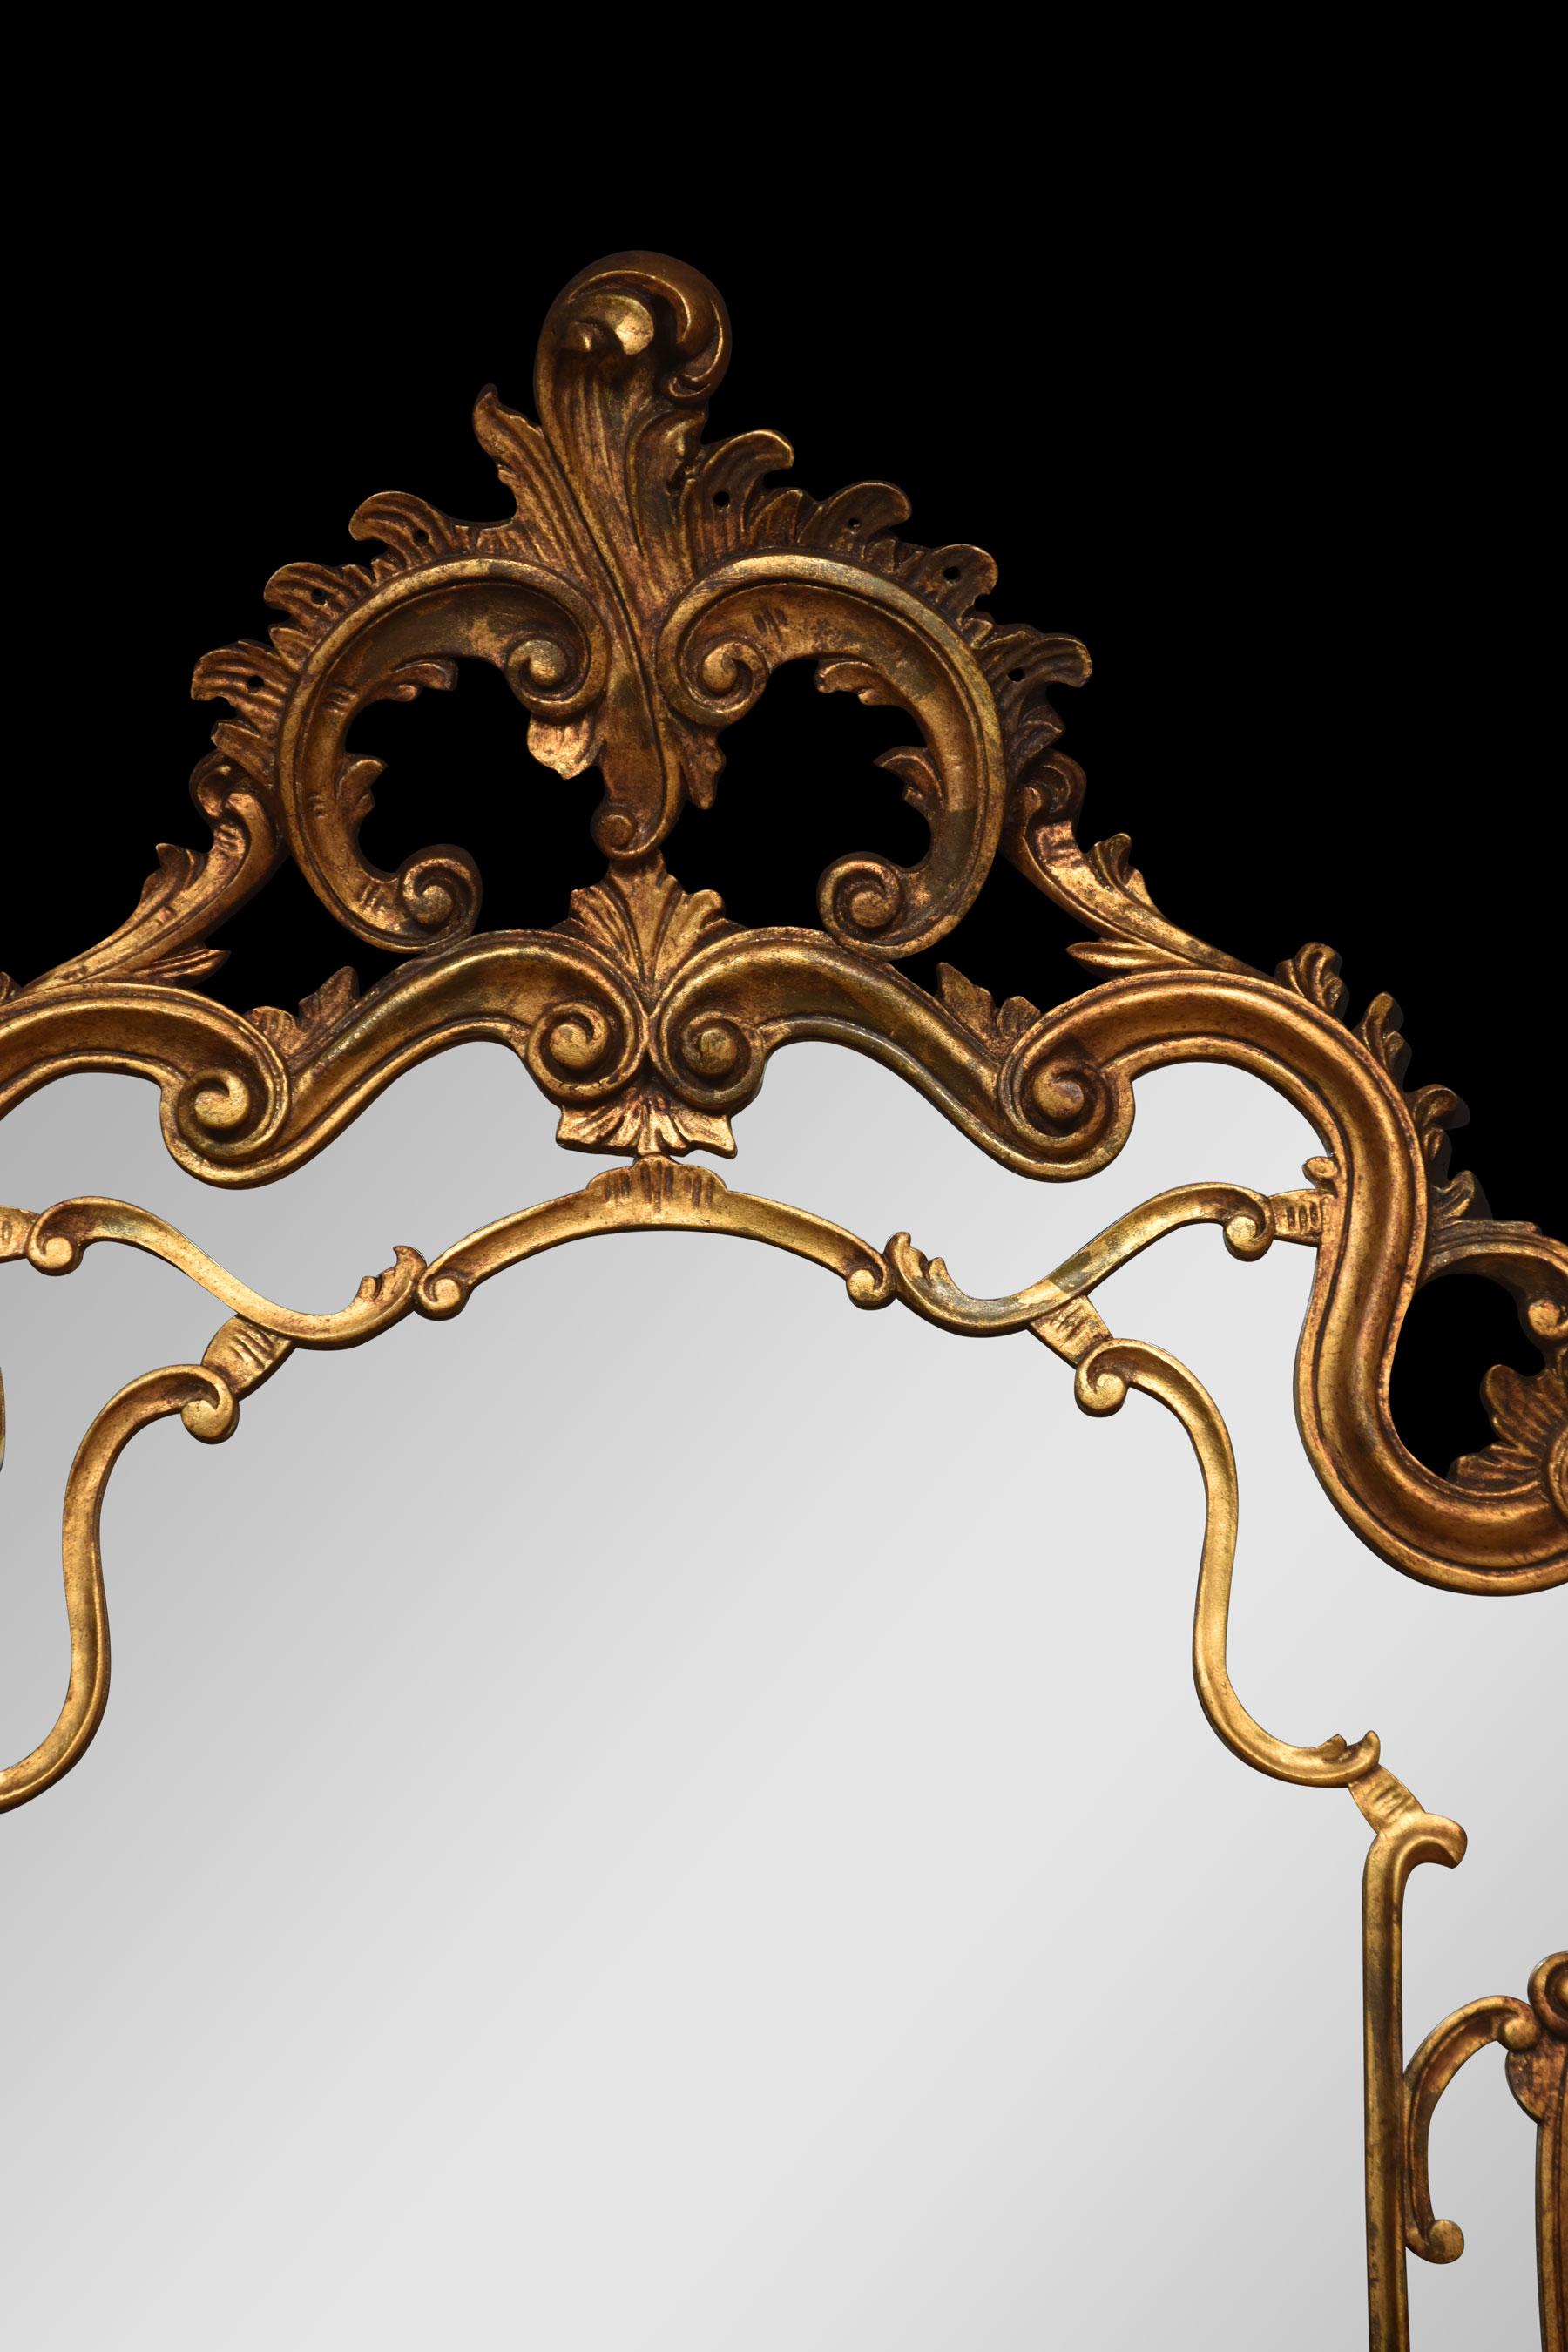 18th century style giltwood wall mirror with elaborate scrolling and foliate mounted frame encasing the original mirror plate.
Dimensions
Height 60 Inches
Width 37.5 Inches
Depth 6 Inches.